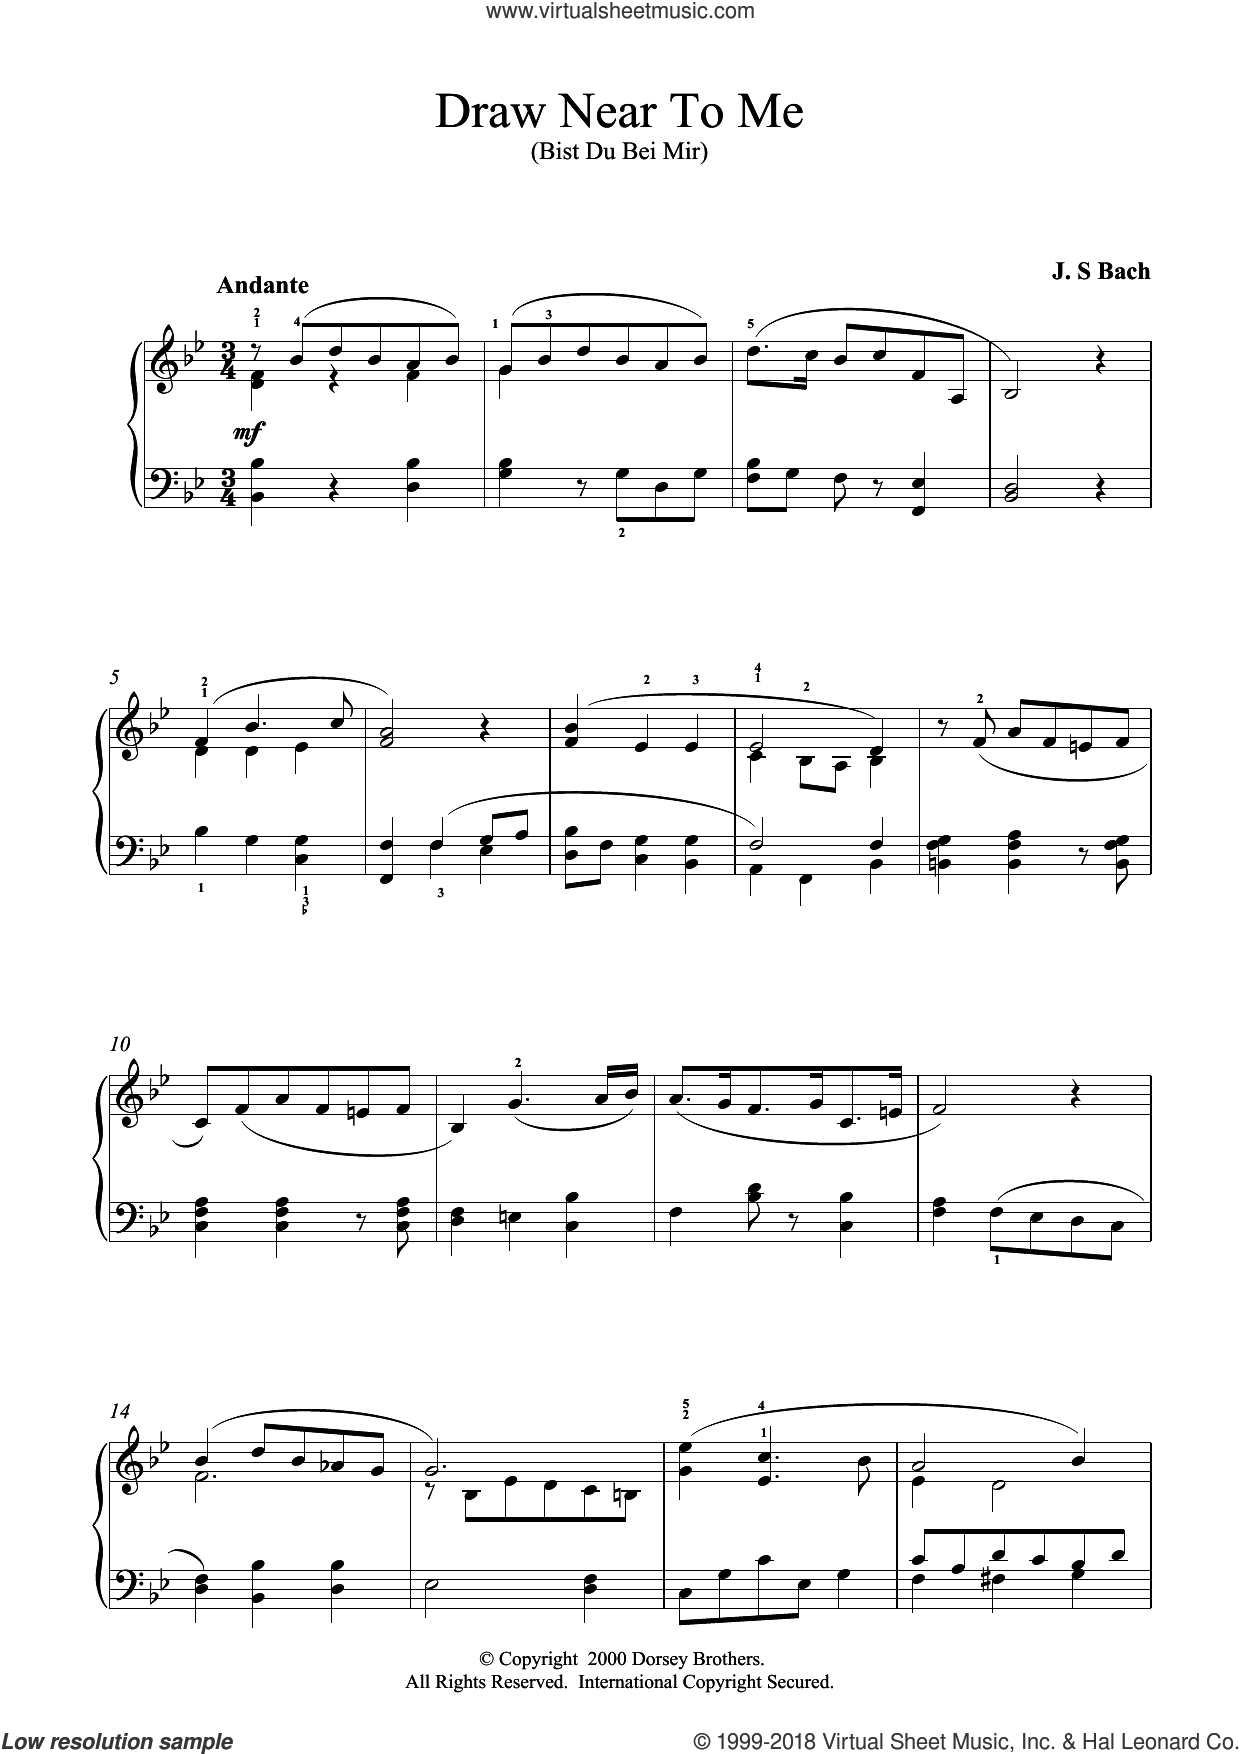 How to Write Sheet Music: 15 Steps (with Pictures) - wikiHow